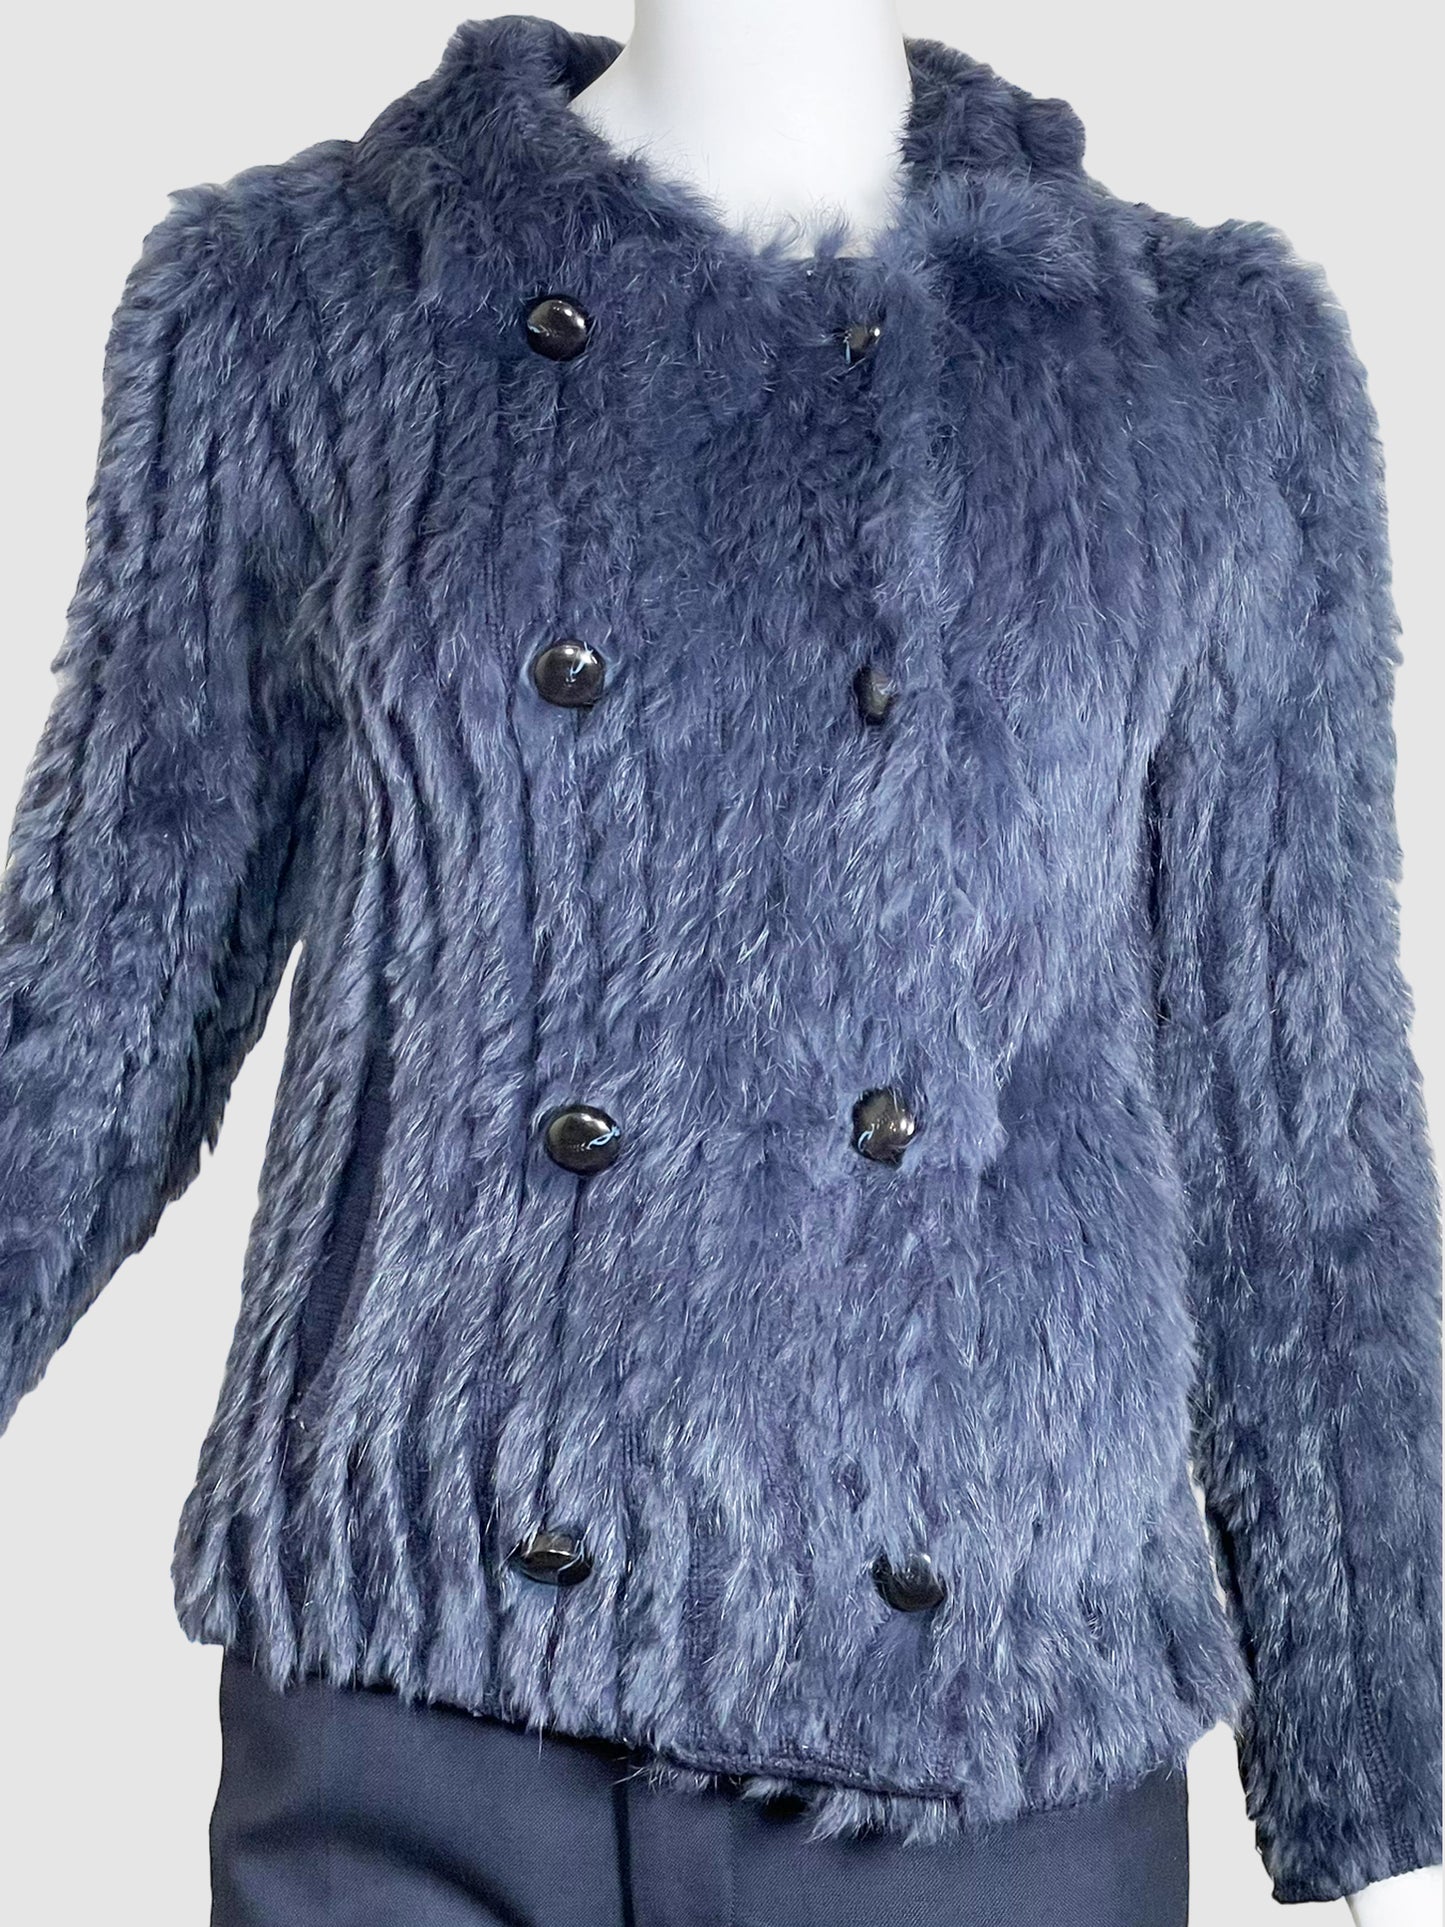 Marc by Marc Jacobs Double-Breasted Fur Jacket - Size S